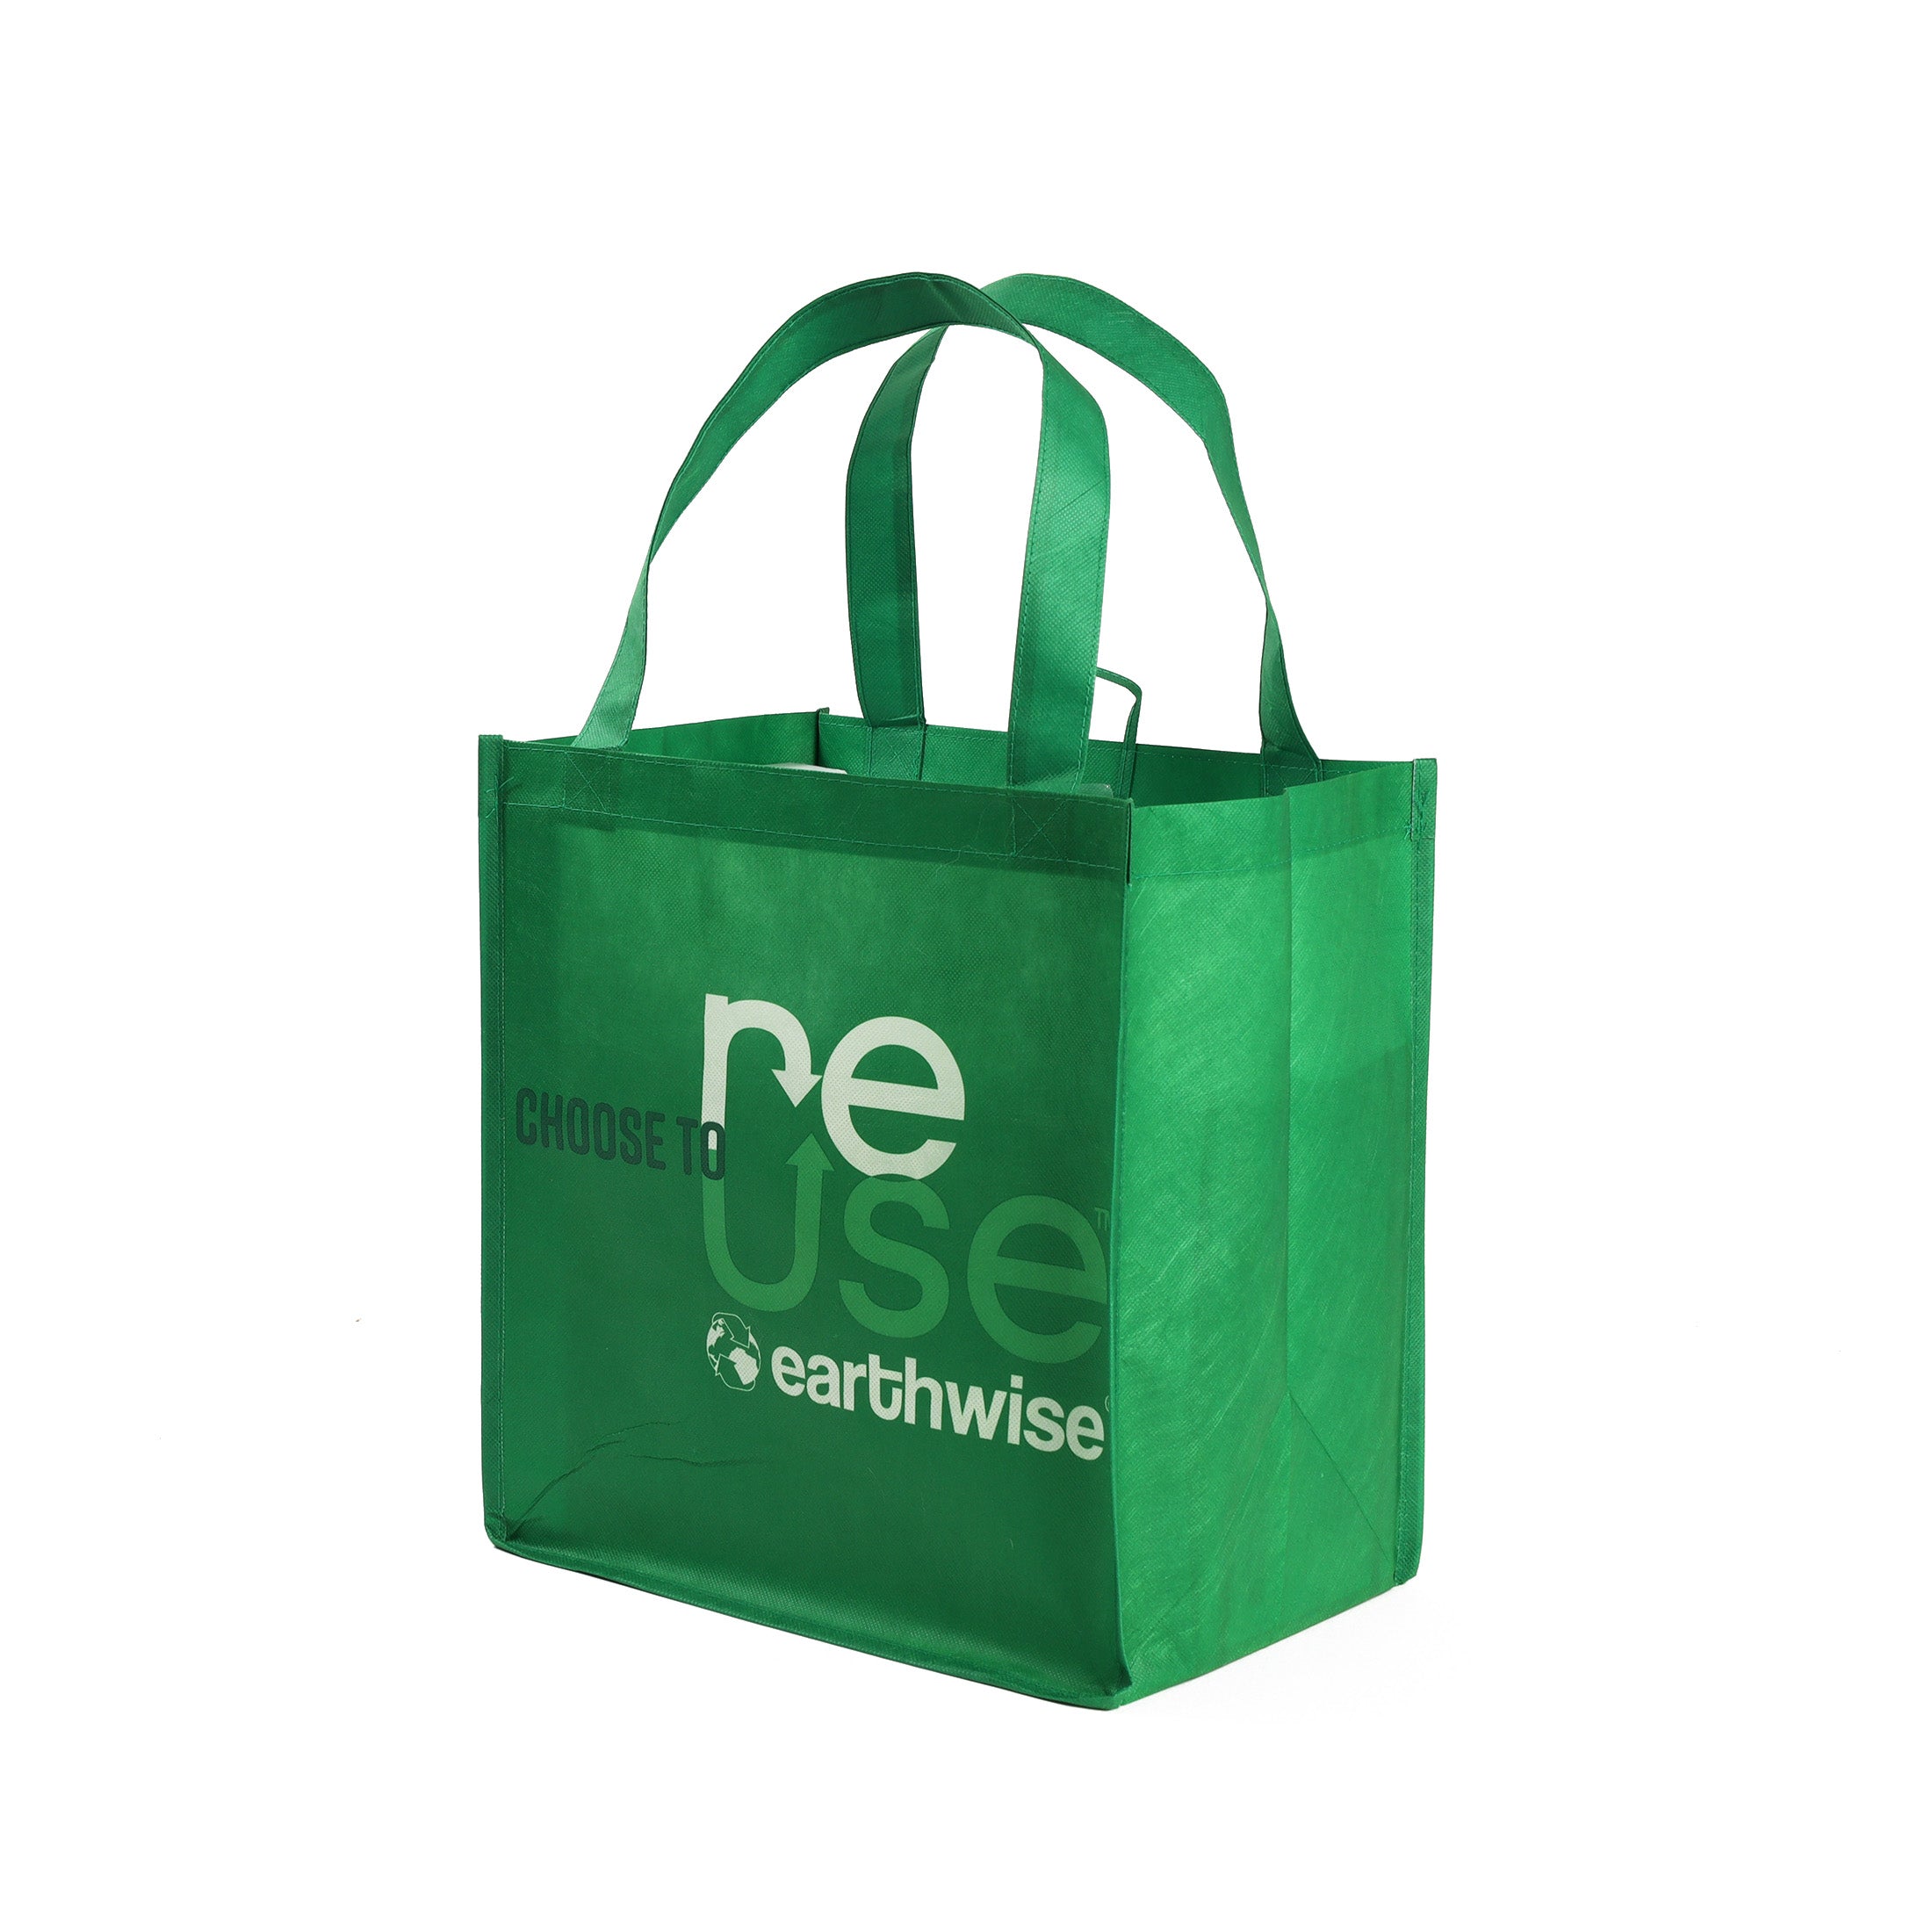 Reusable Shopping Bags for sale in Rocky Point, North Carolina